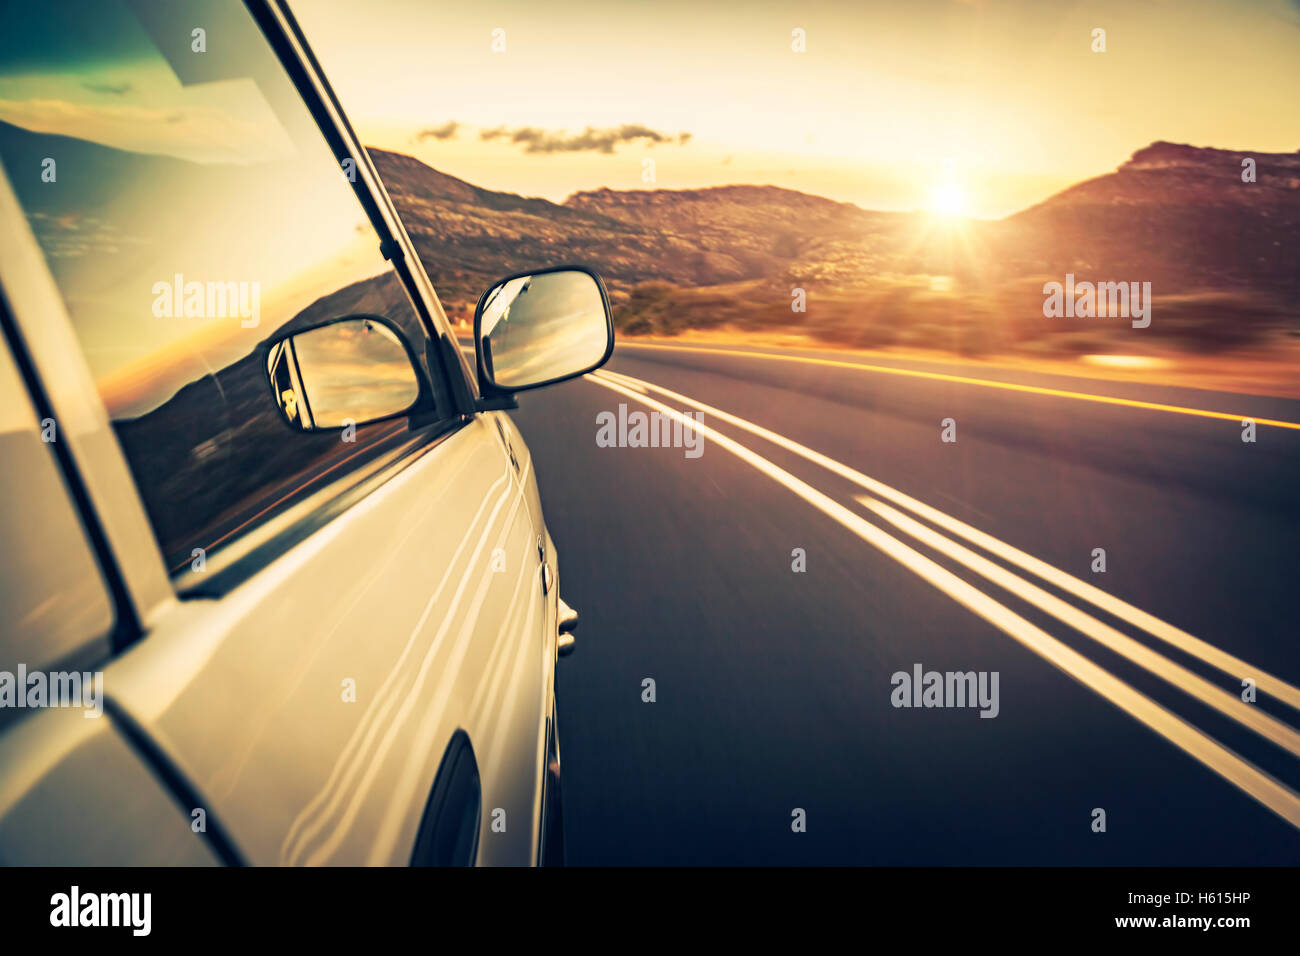 Road trip on sunset, car on the highway, conceptual image of escape and adventure travel, slow motion photo Stock Photo